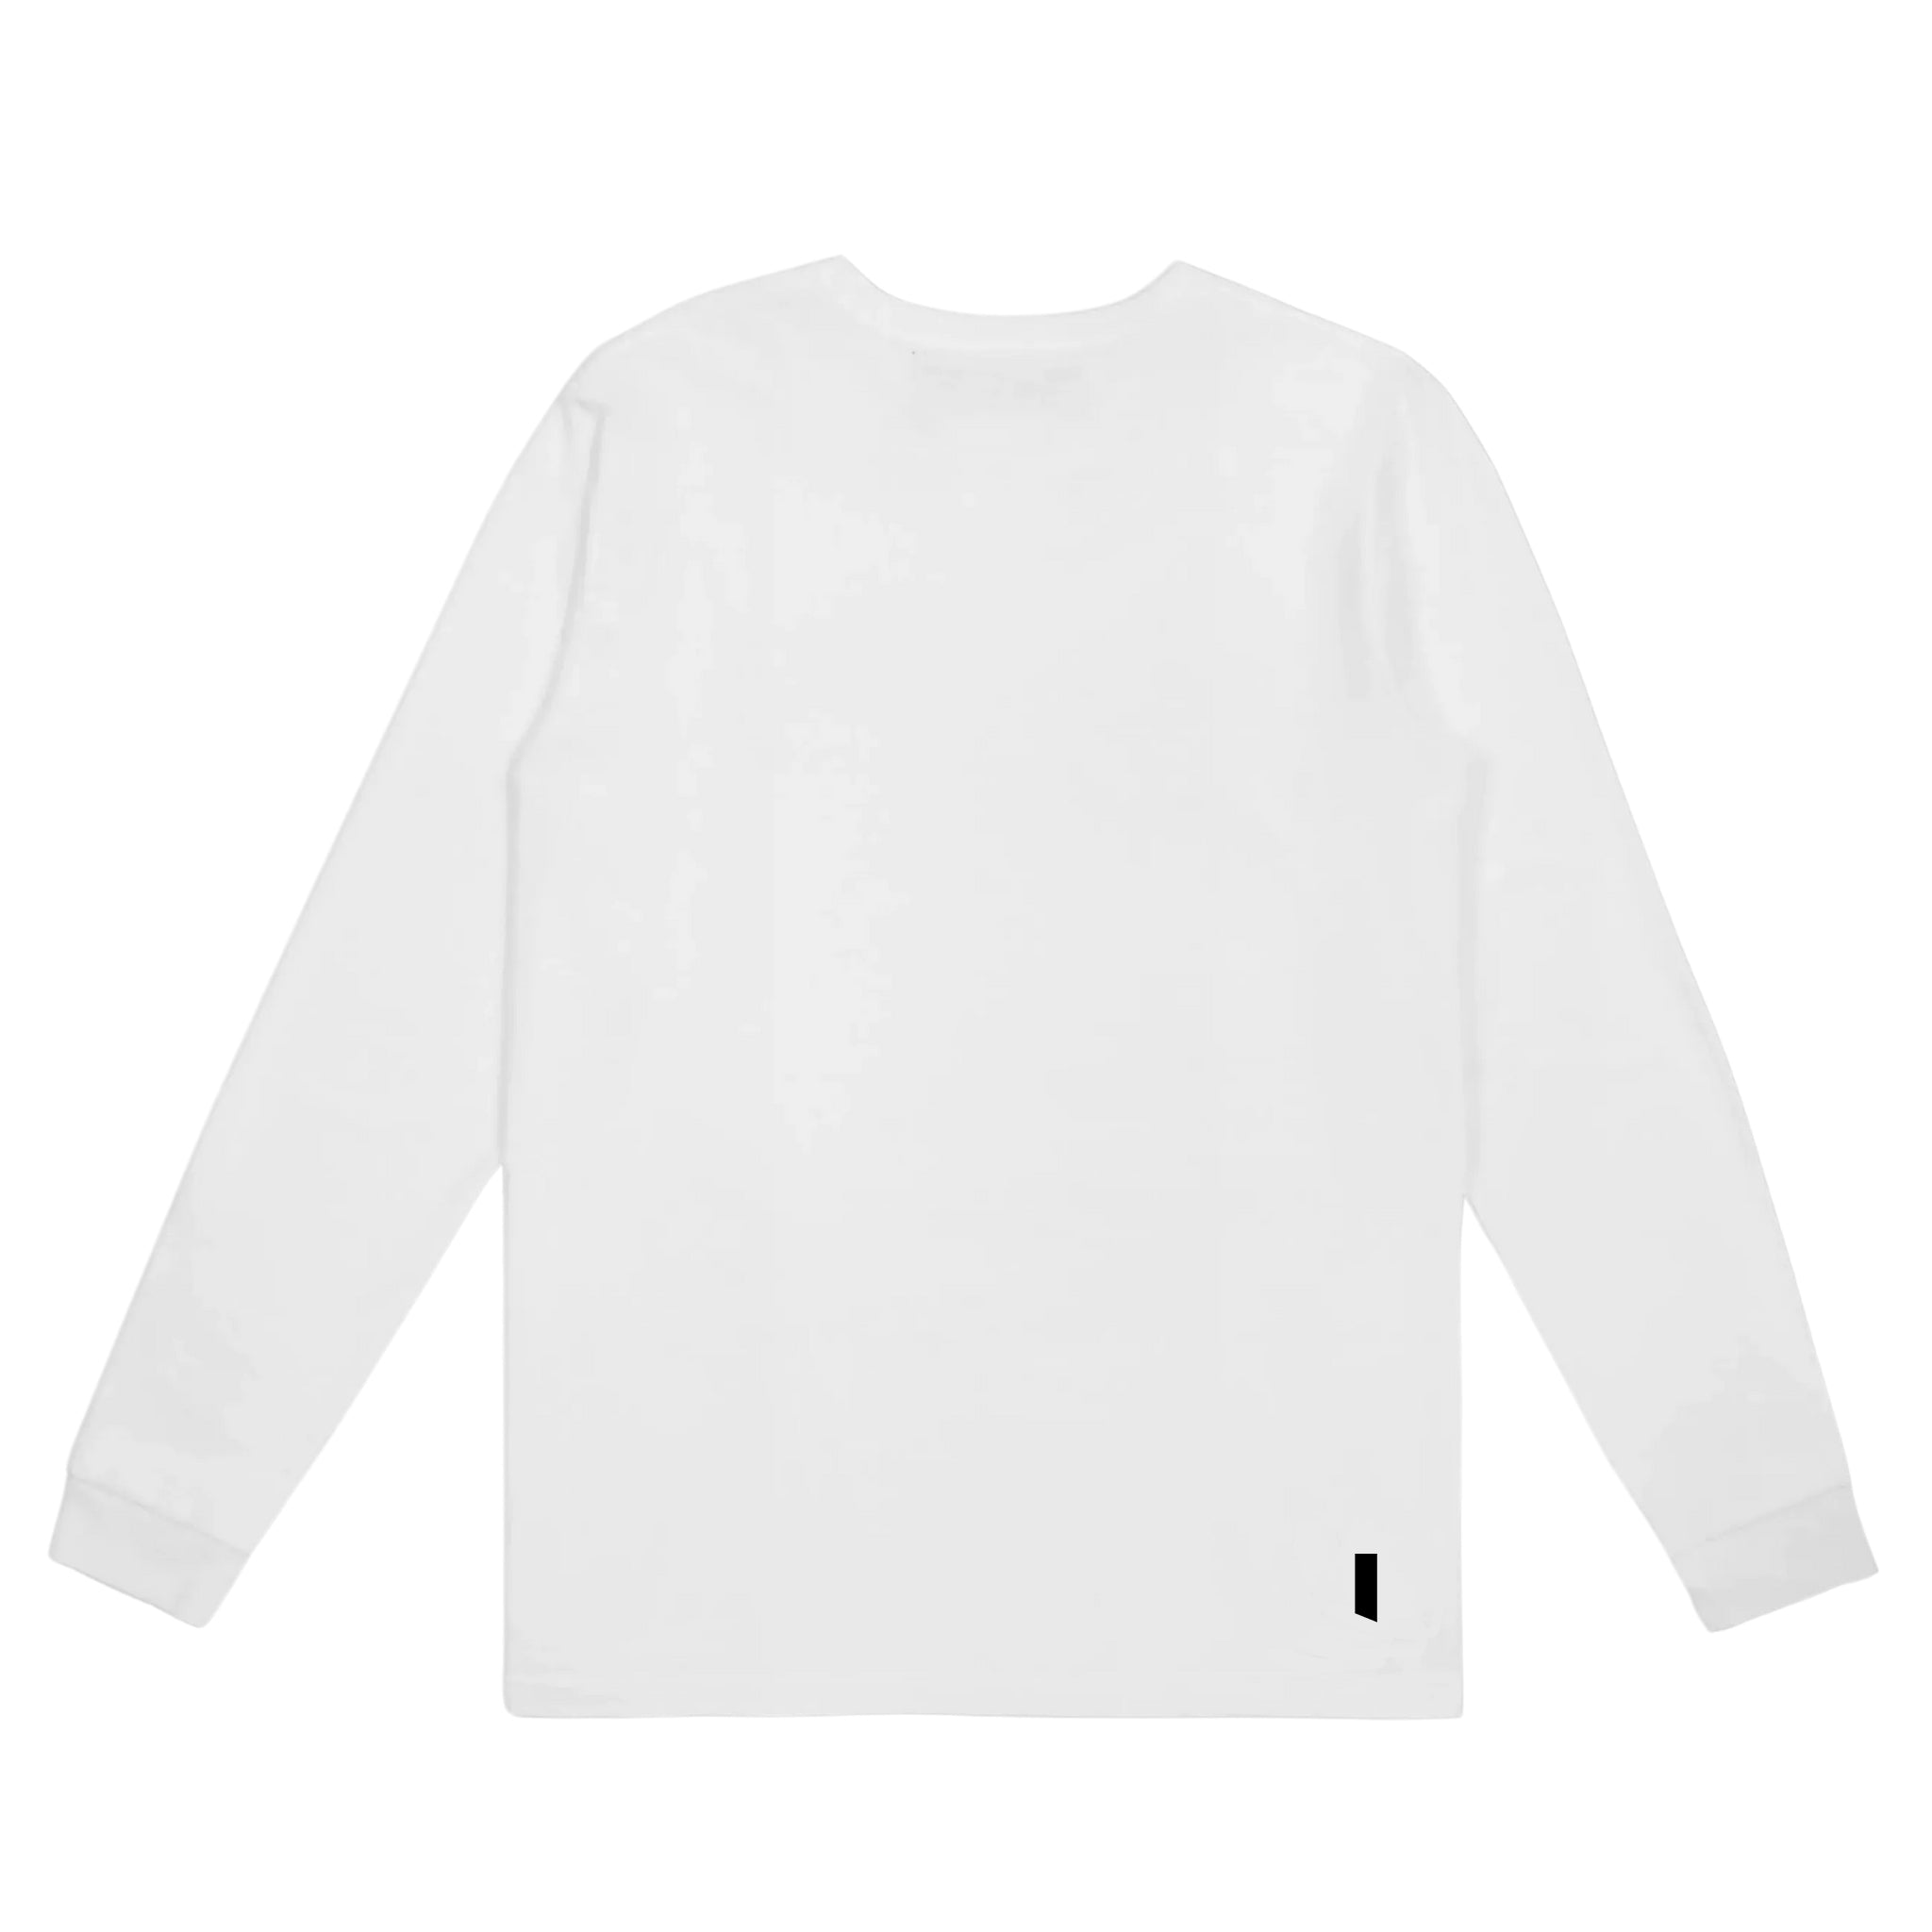 Back view of white long sleeve tee, front center on a white background.